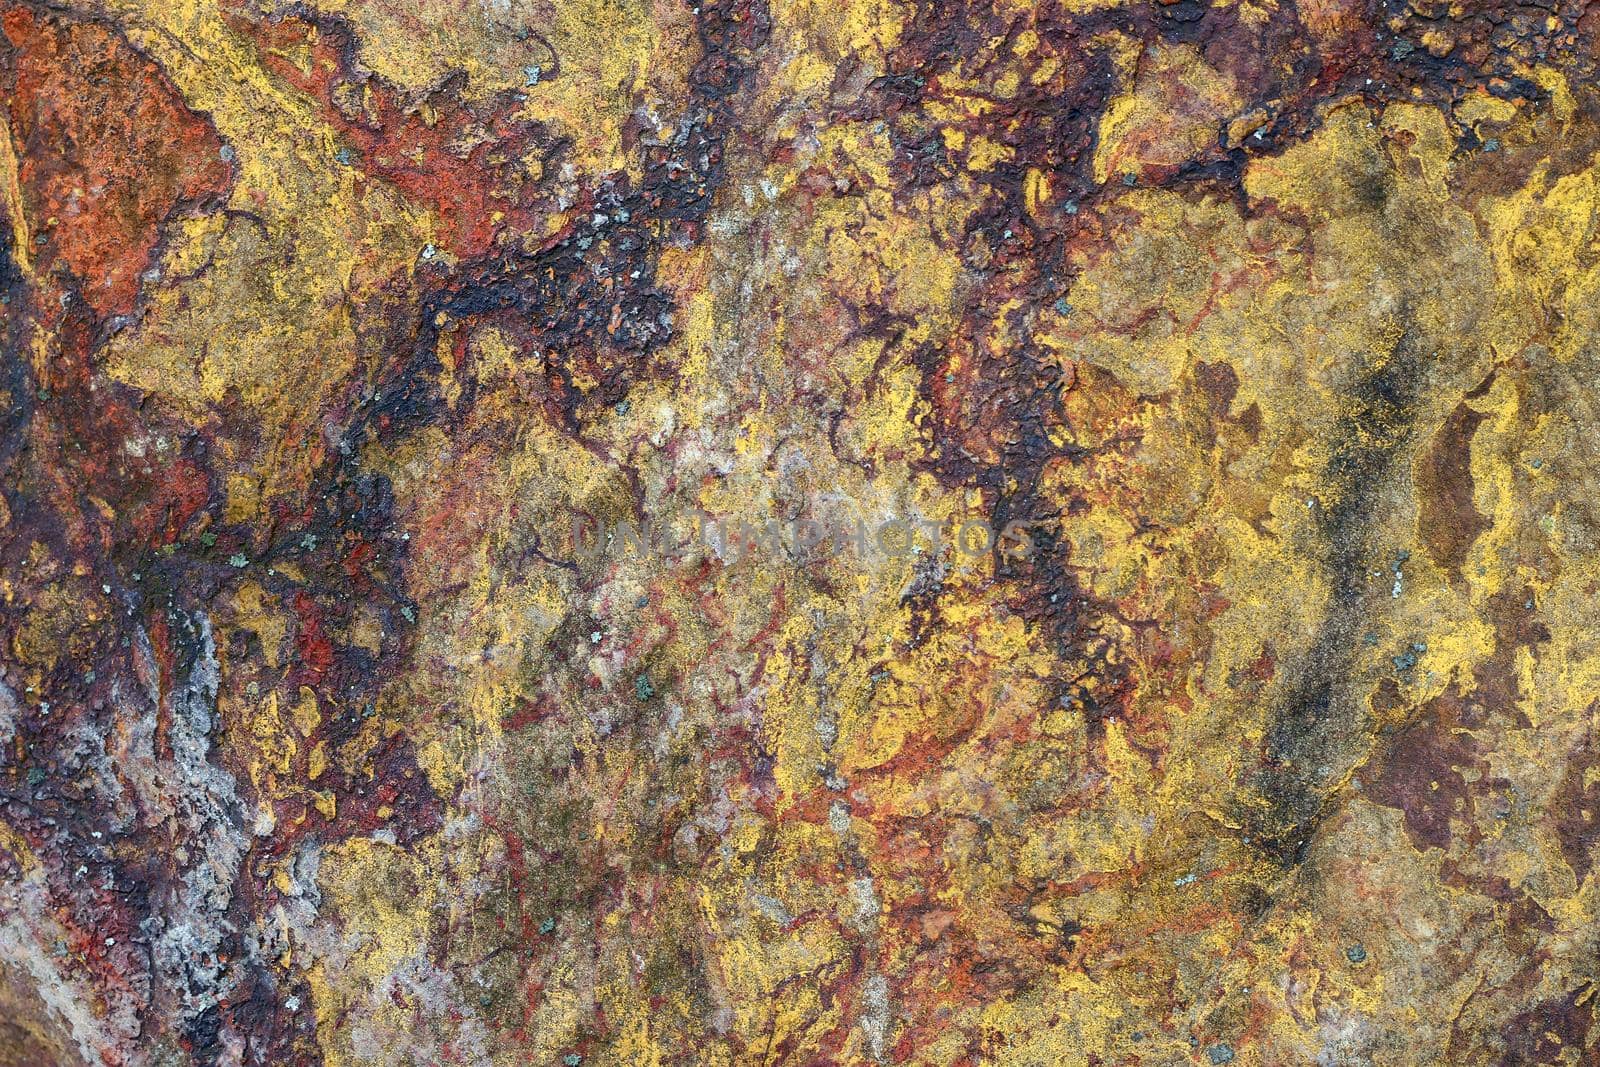 Detail of the surface of the quartz rock by Mibuch